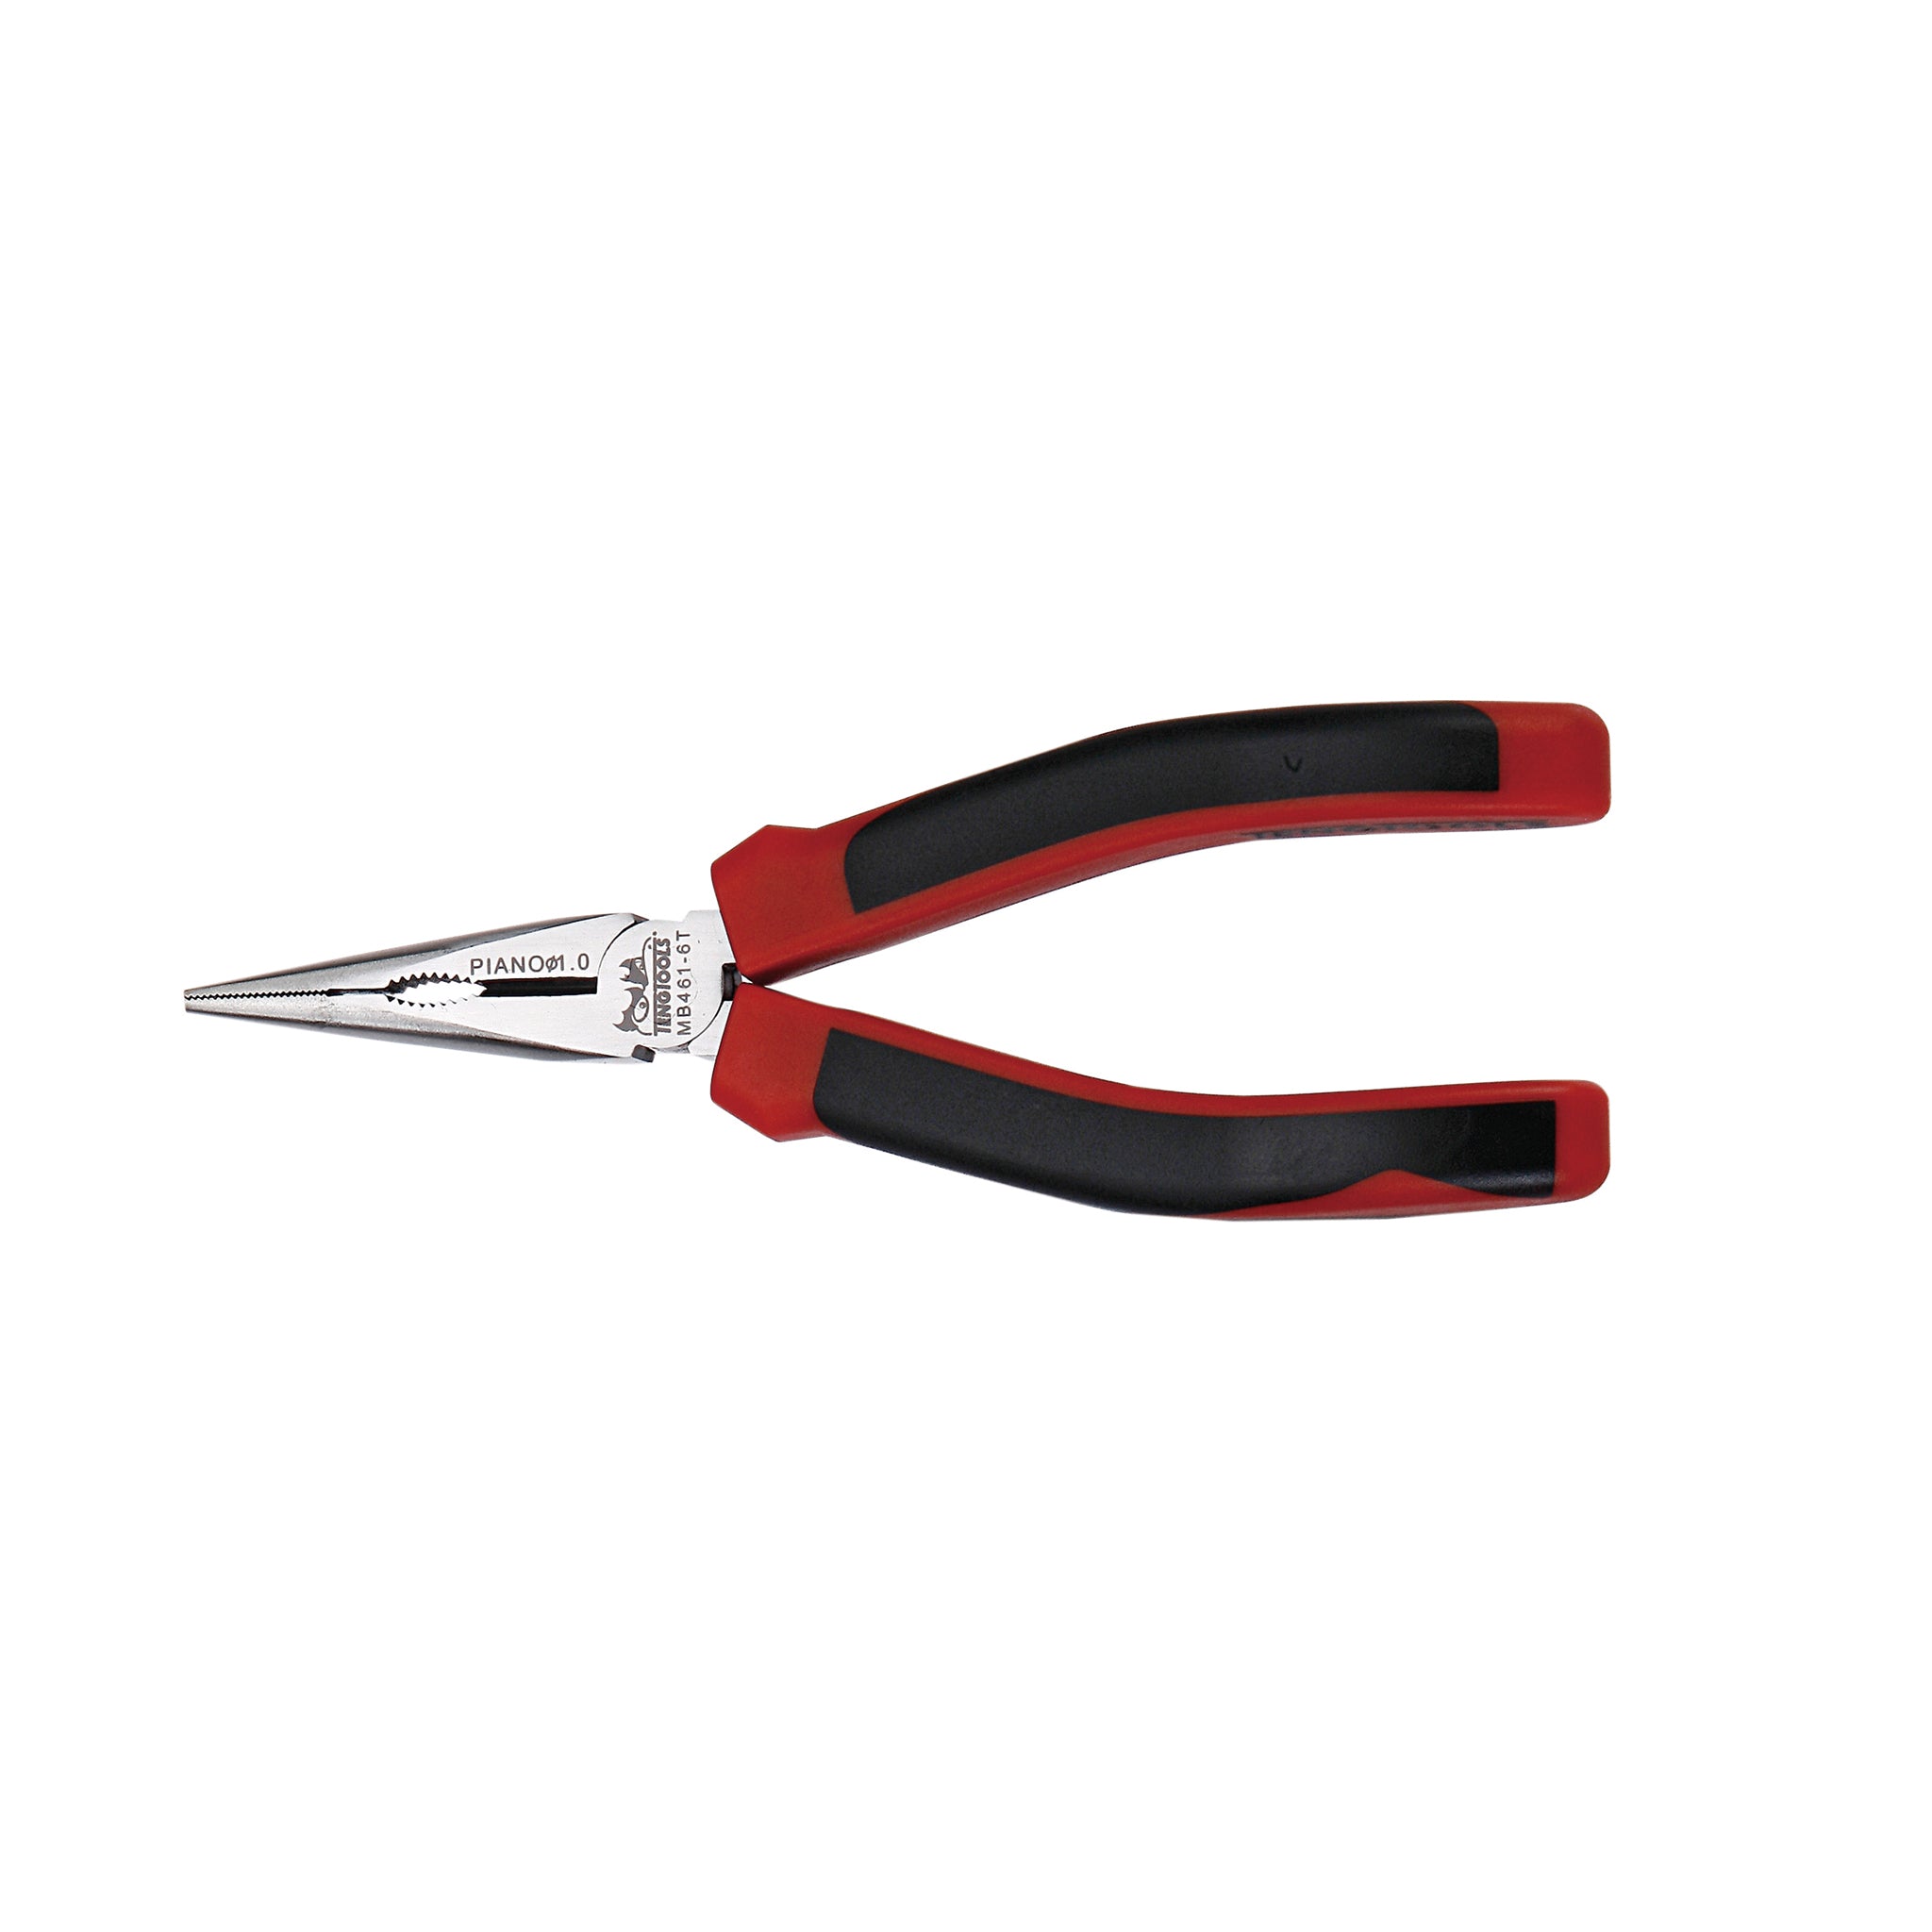 Teng Tools Long Nose Pliers With TPR Grip Handles - 8 Inch